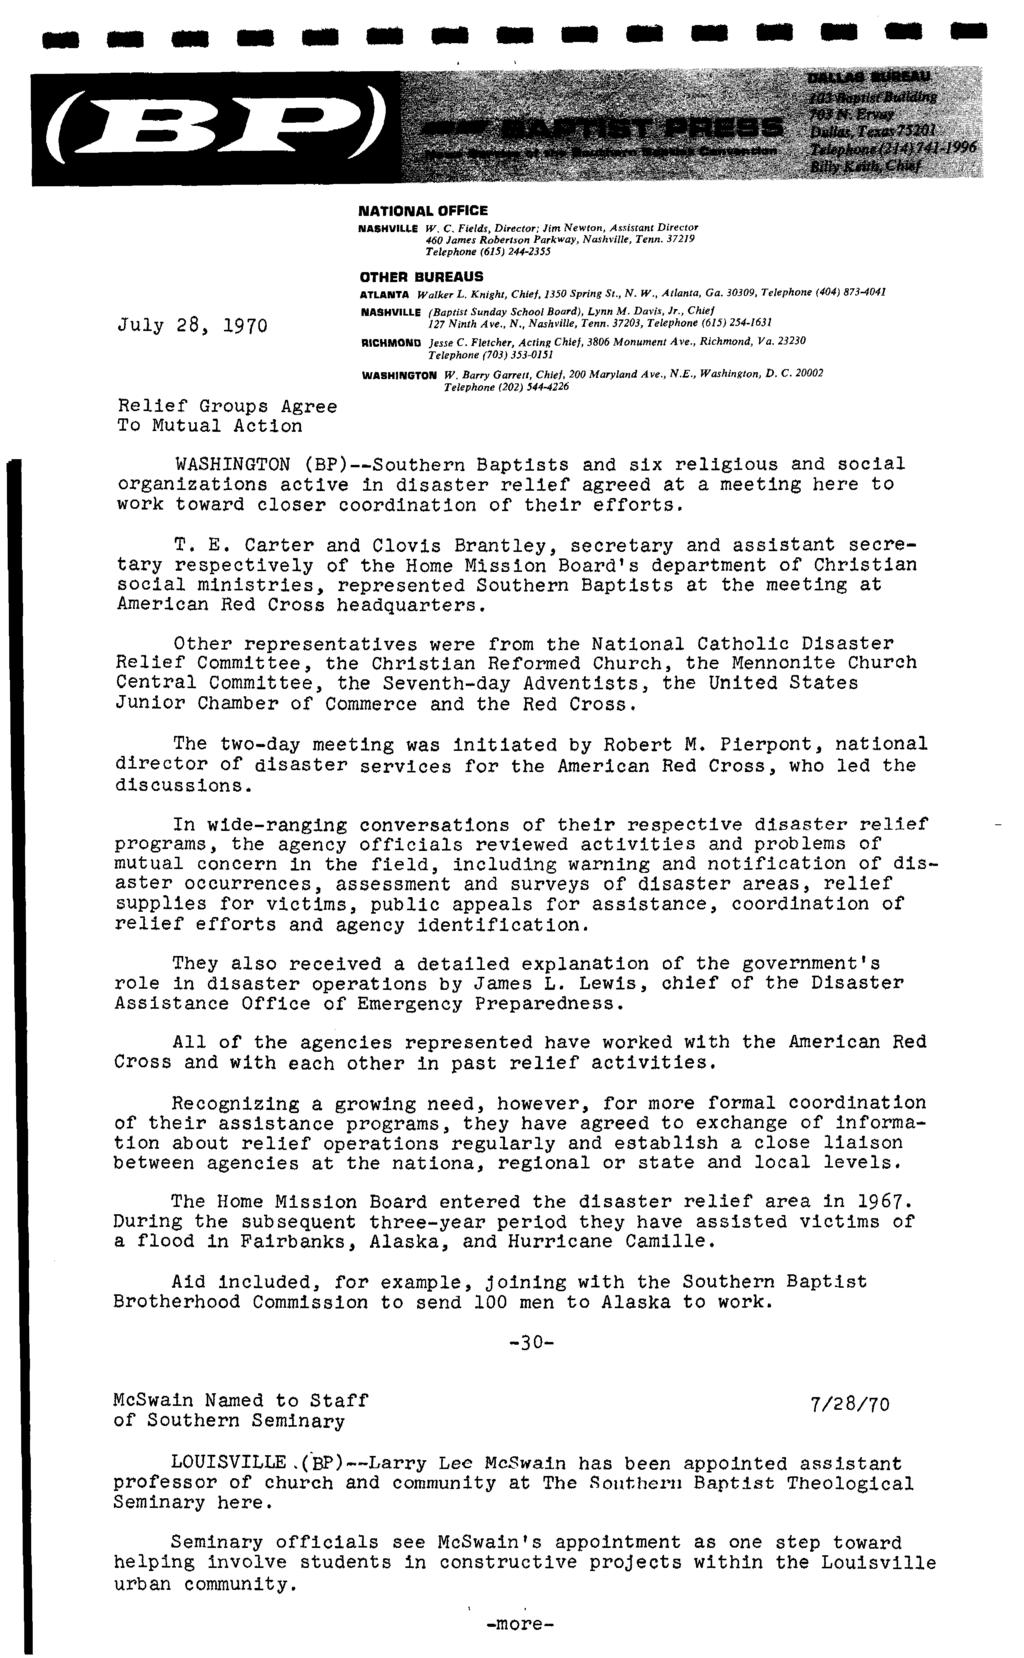 ------------_... JUly 28, 1970 Relief Groups Agree To Mutual Action NATIONAL OFFICE NASHVILLE W. C. Fields, Director; Jim Newton, Assistant Director 460 James Roberlson Parkway, Nashville, Tenn.